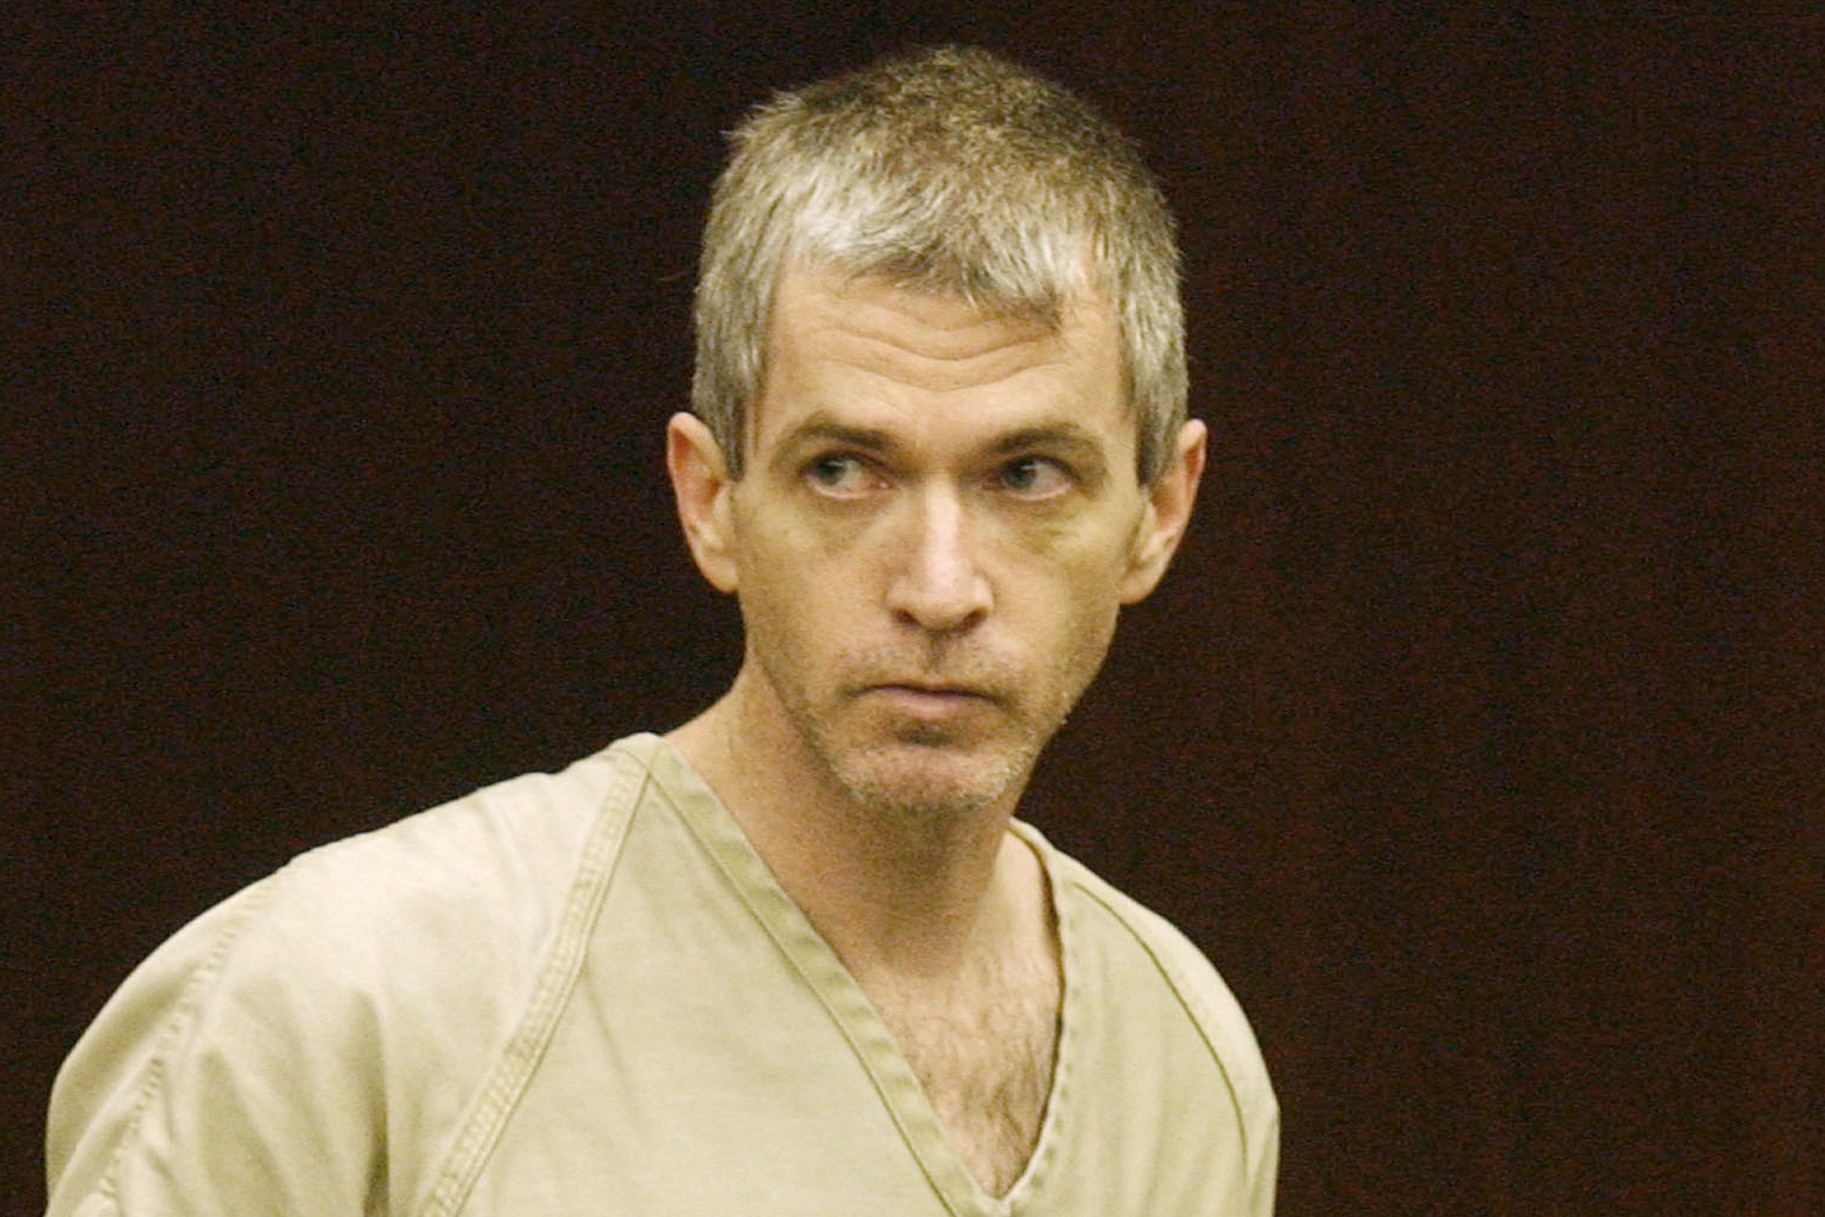 Charles Cullen is seen in a courtroom